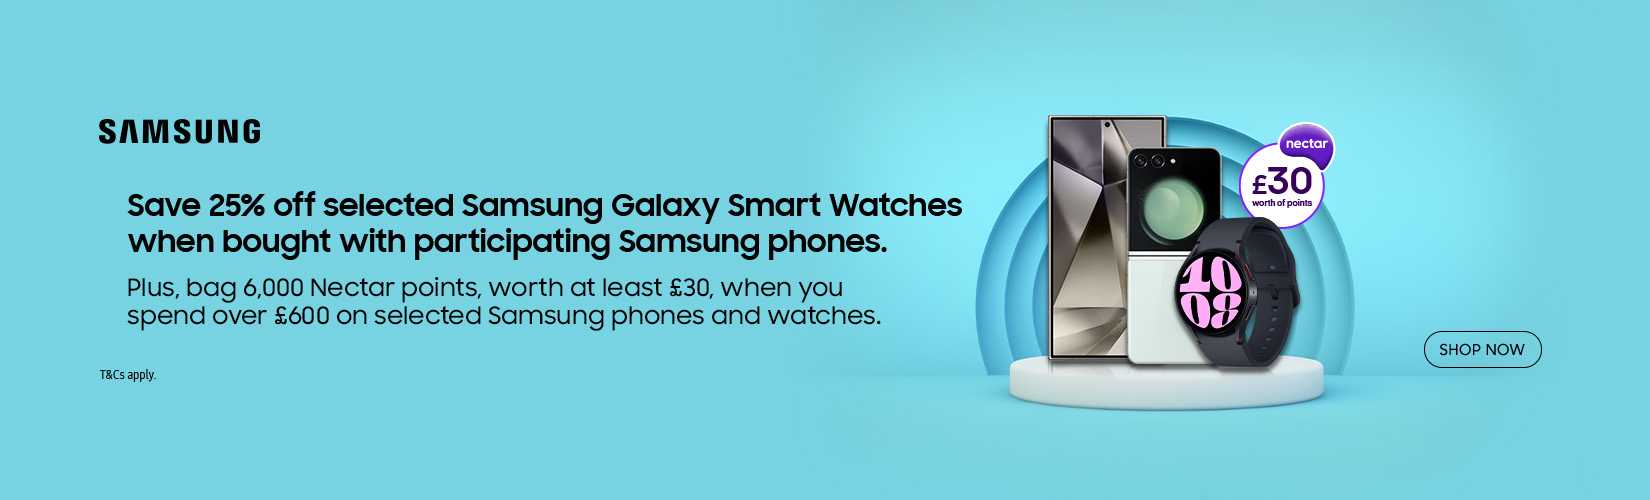 Samsung. Save 25% off selected Samsung Galaxy Smart watches. When bought with participating Samsung phones.